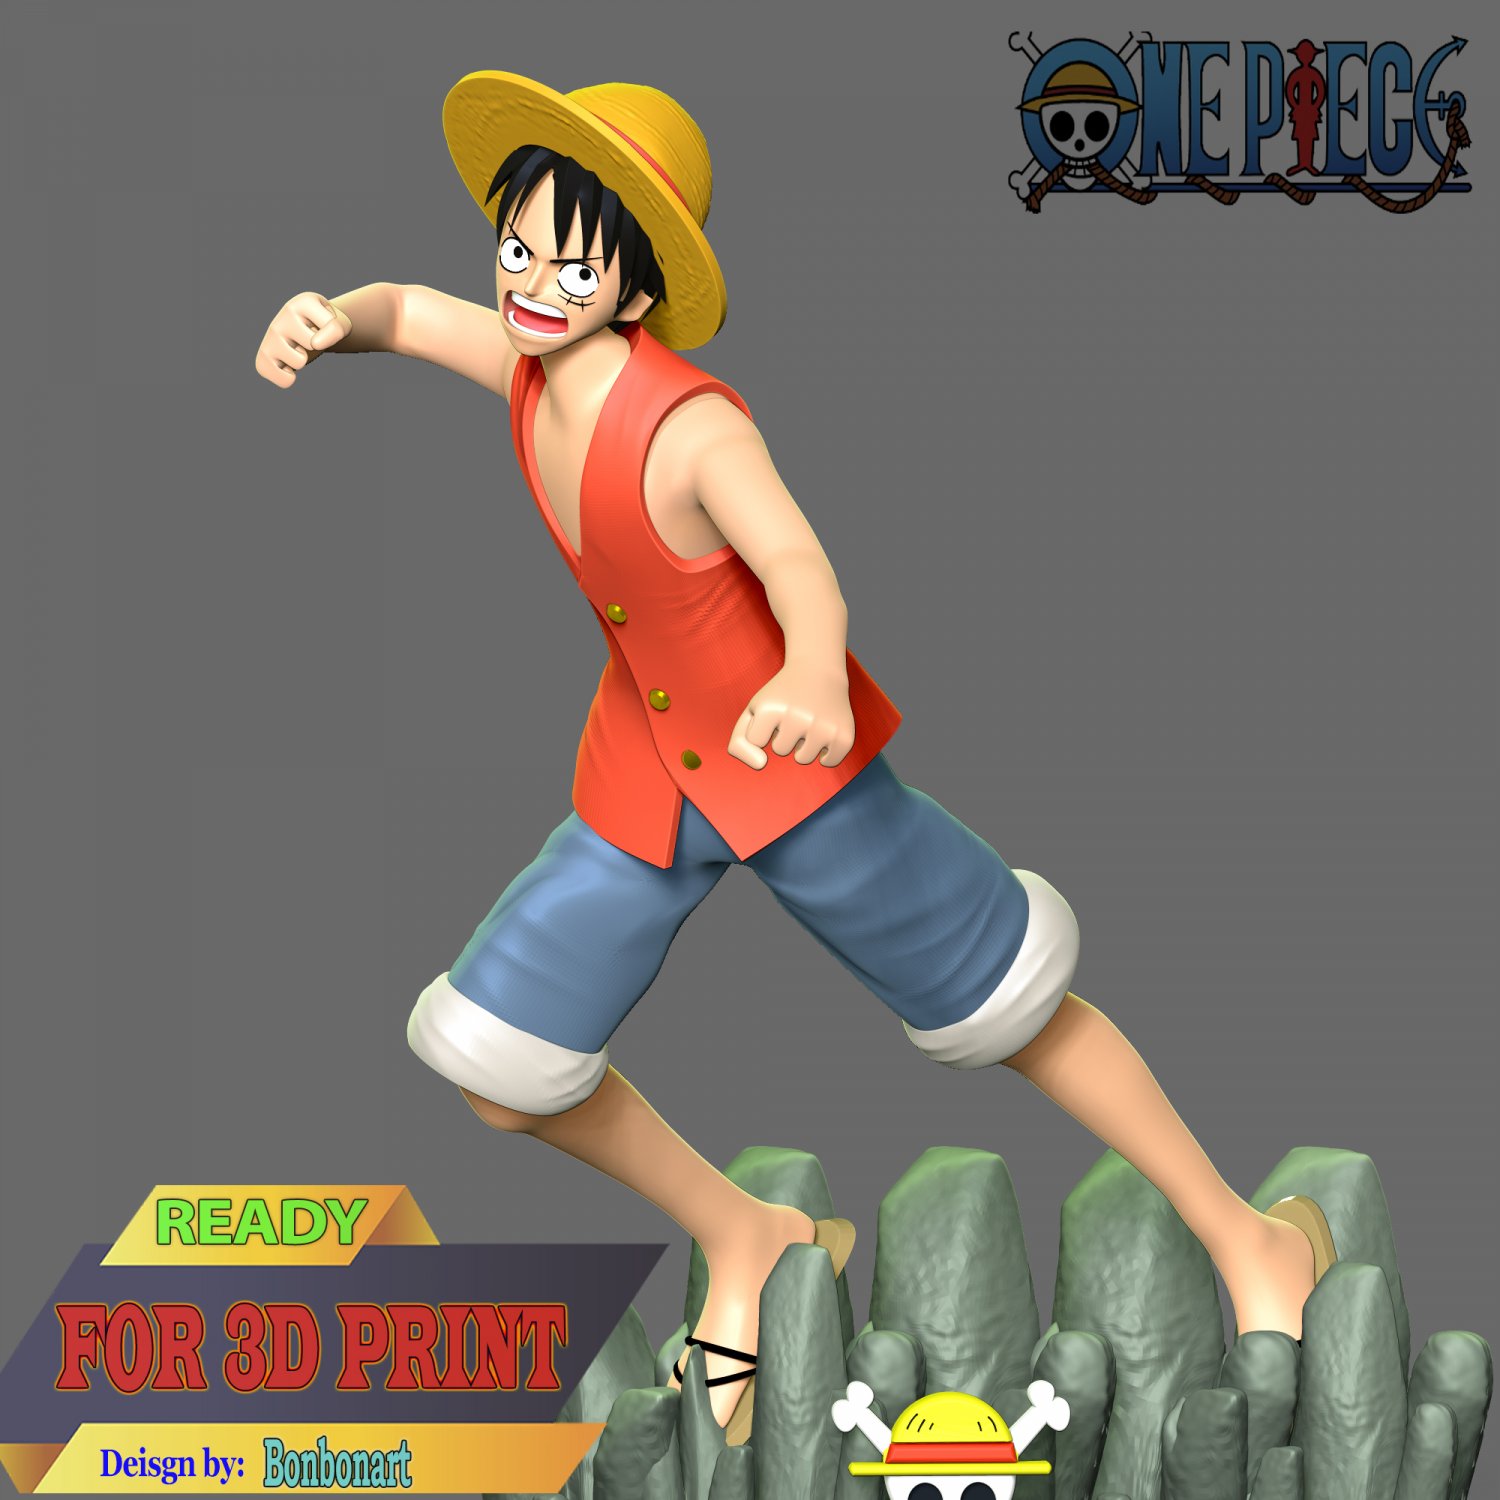 12 One Piece Stampede Images, Stock Photos, 3D objects, & Vectors